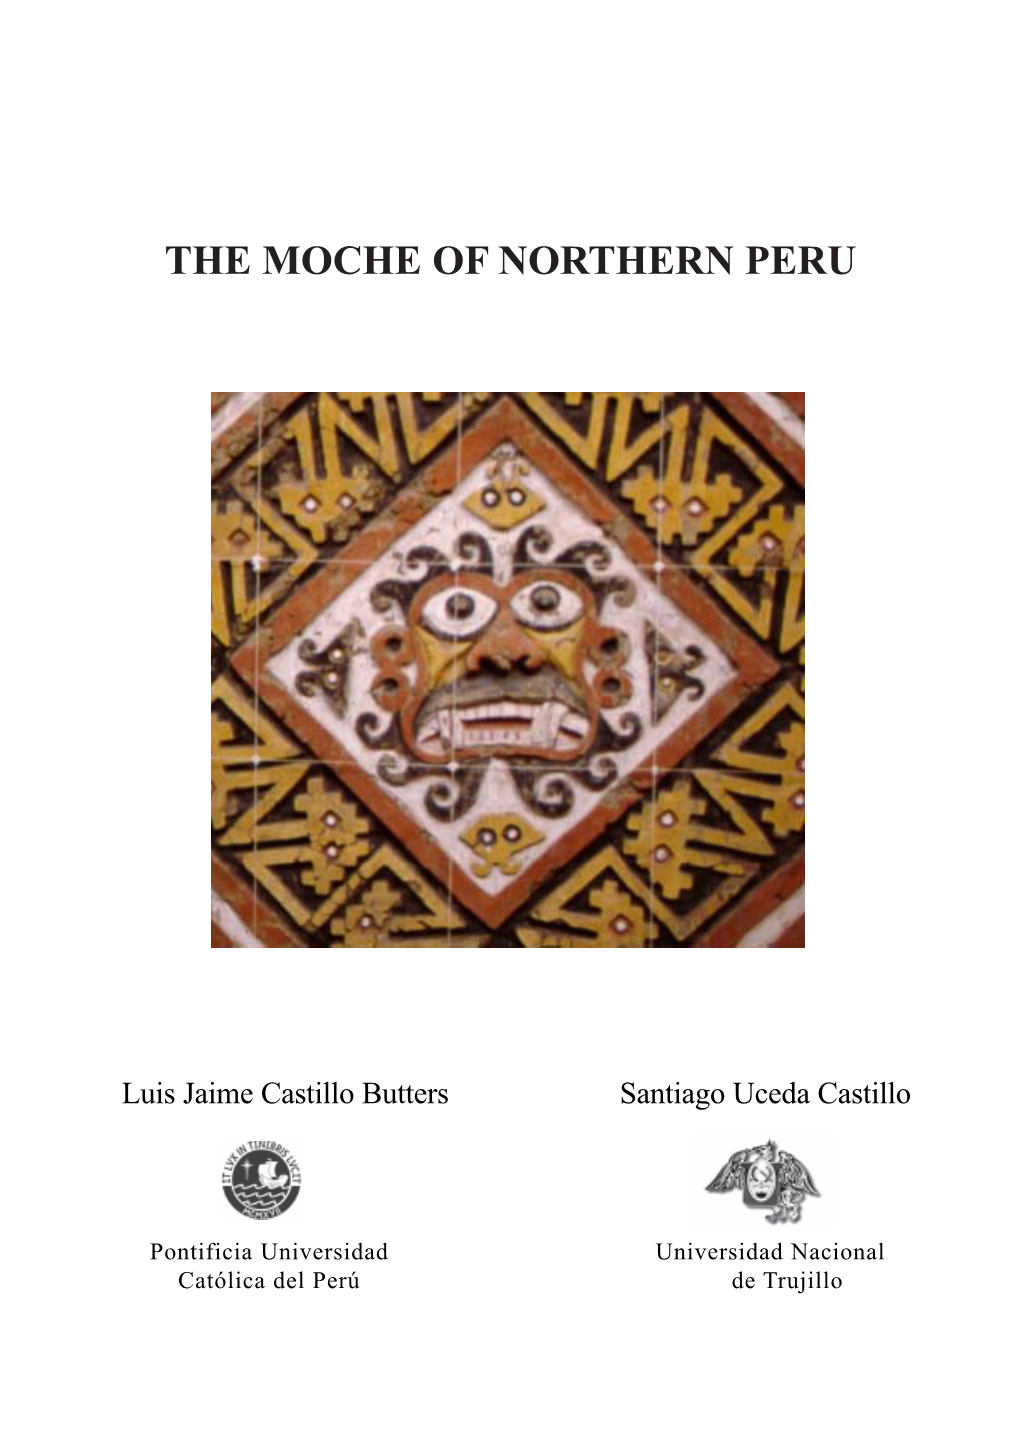 The Moche of Northern Peru.Pmd